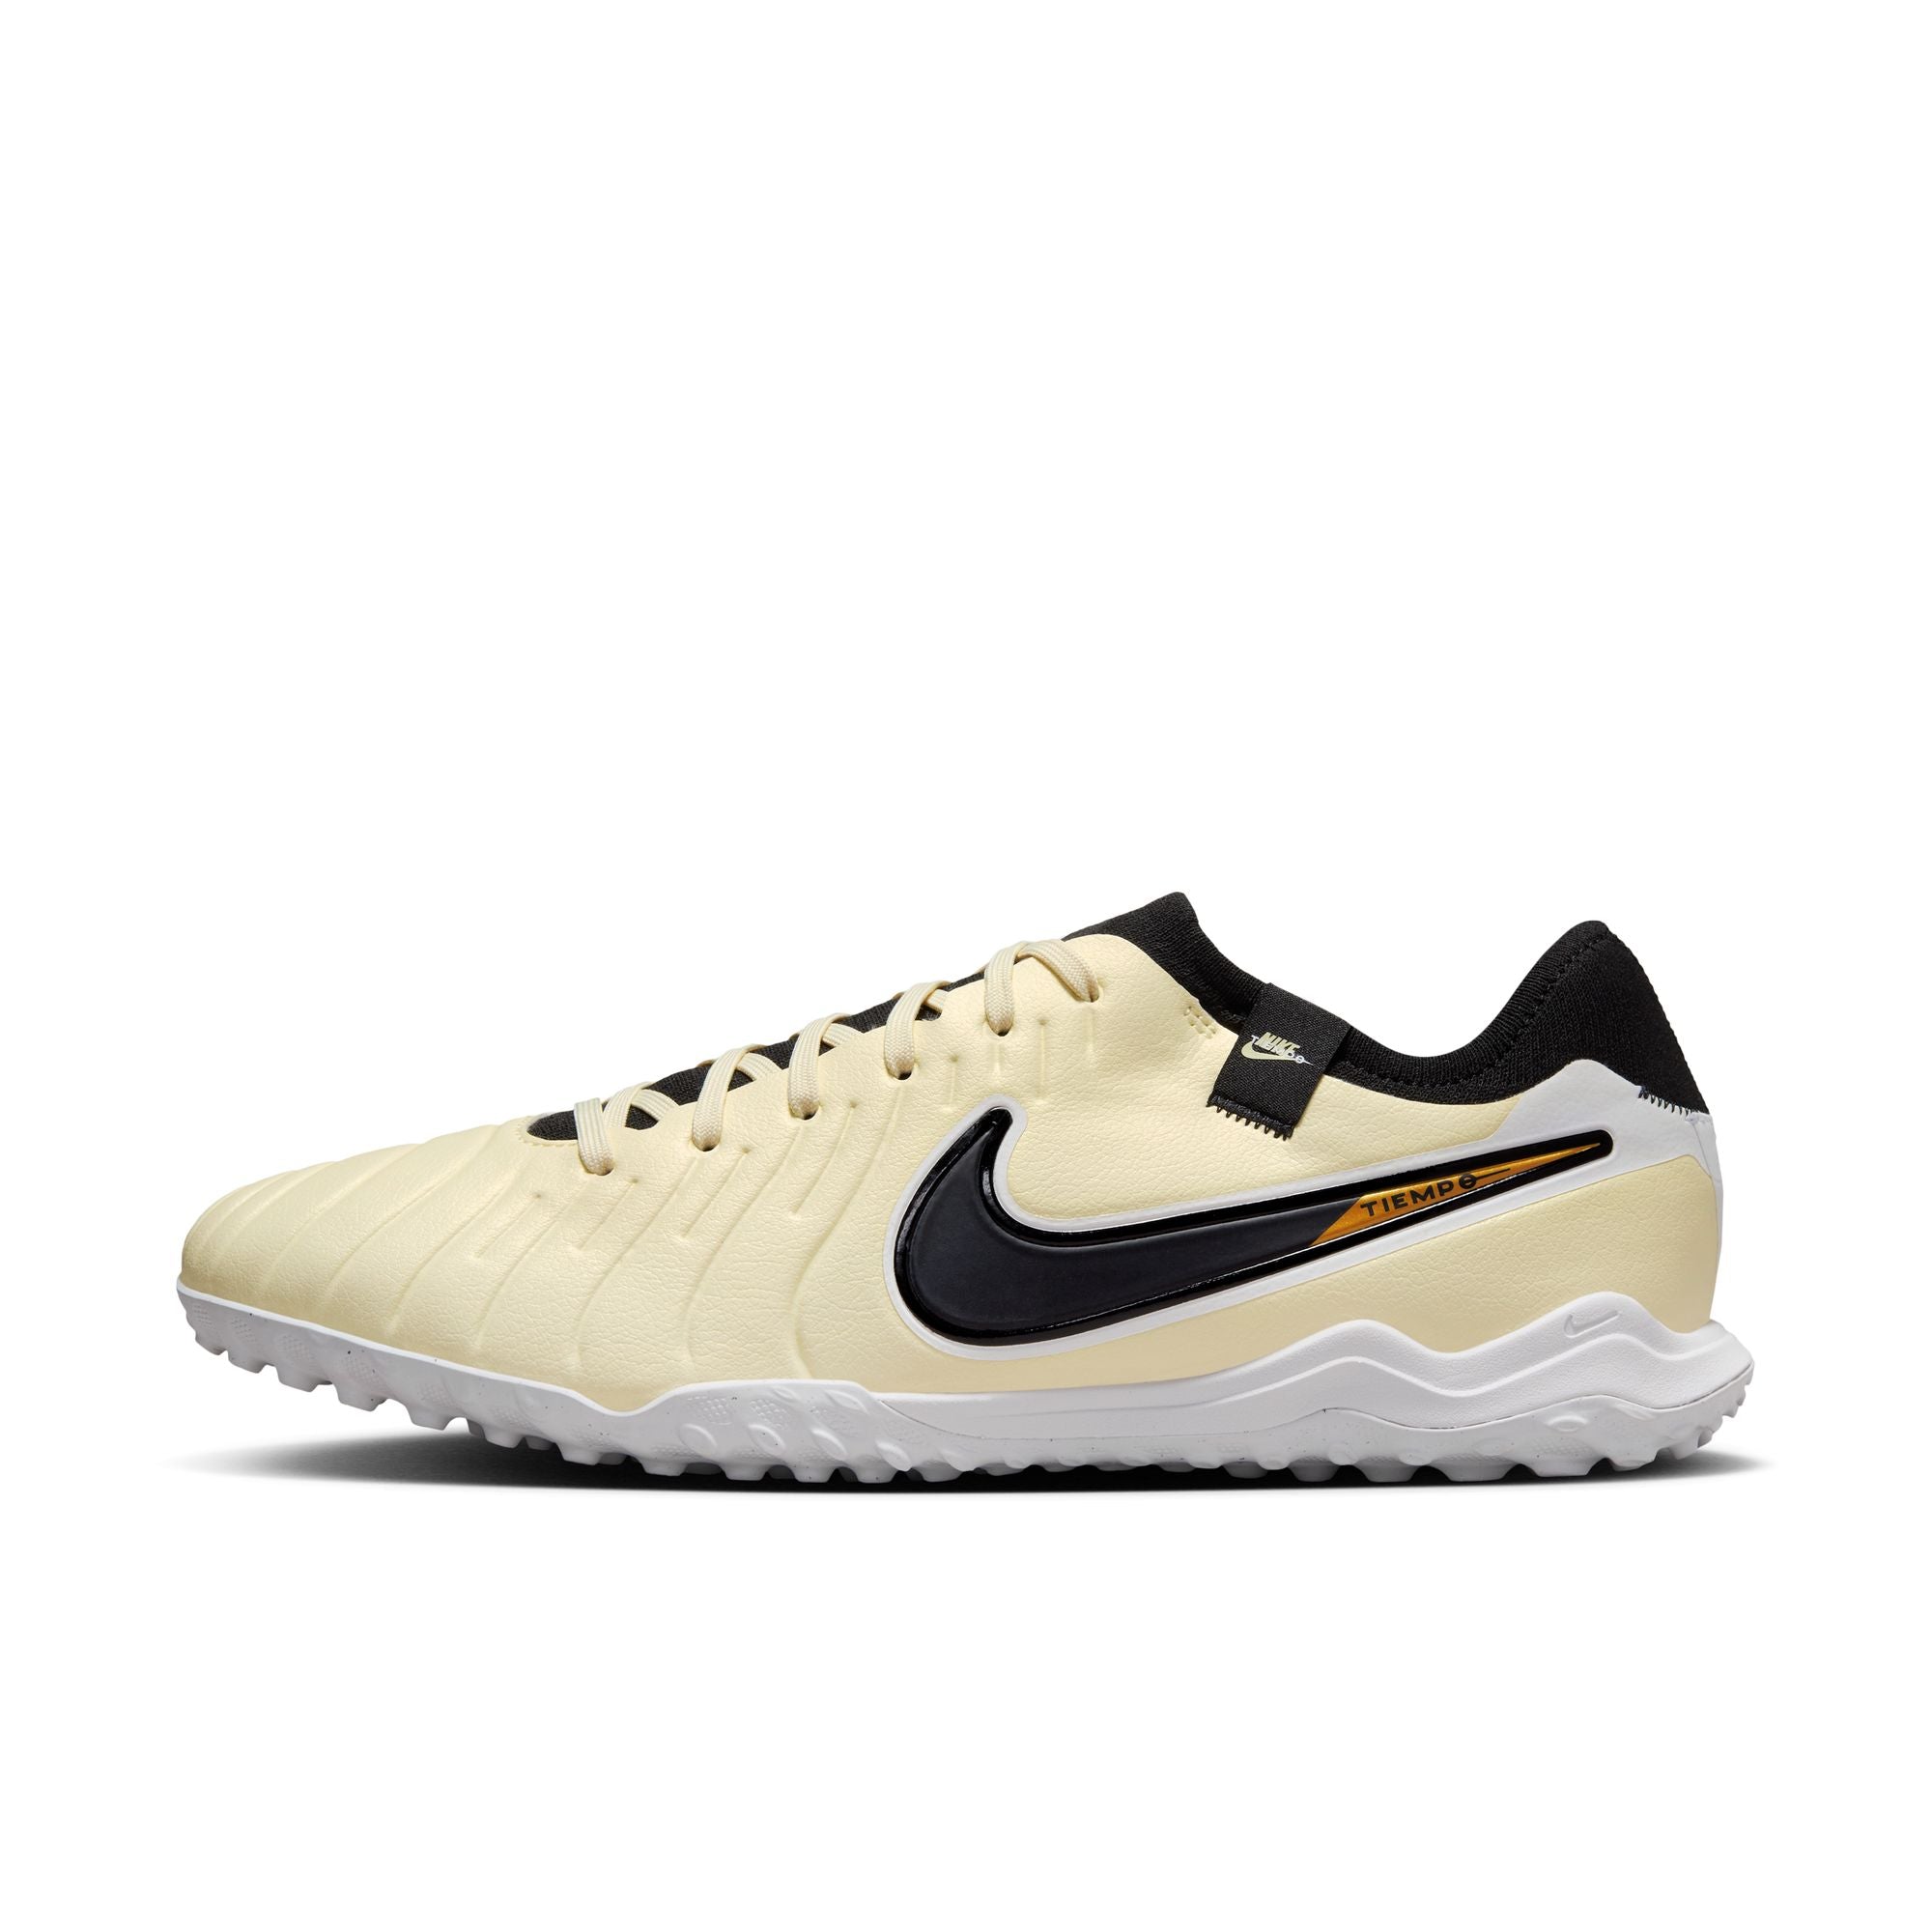 Nike Tiempo Legend 10 Pro Turf Low-Top Soccer Shoes